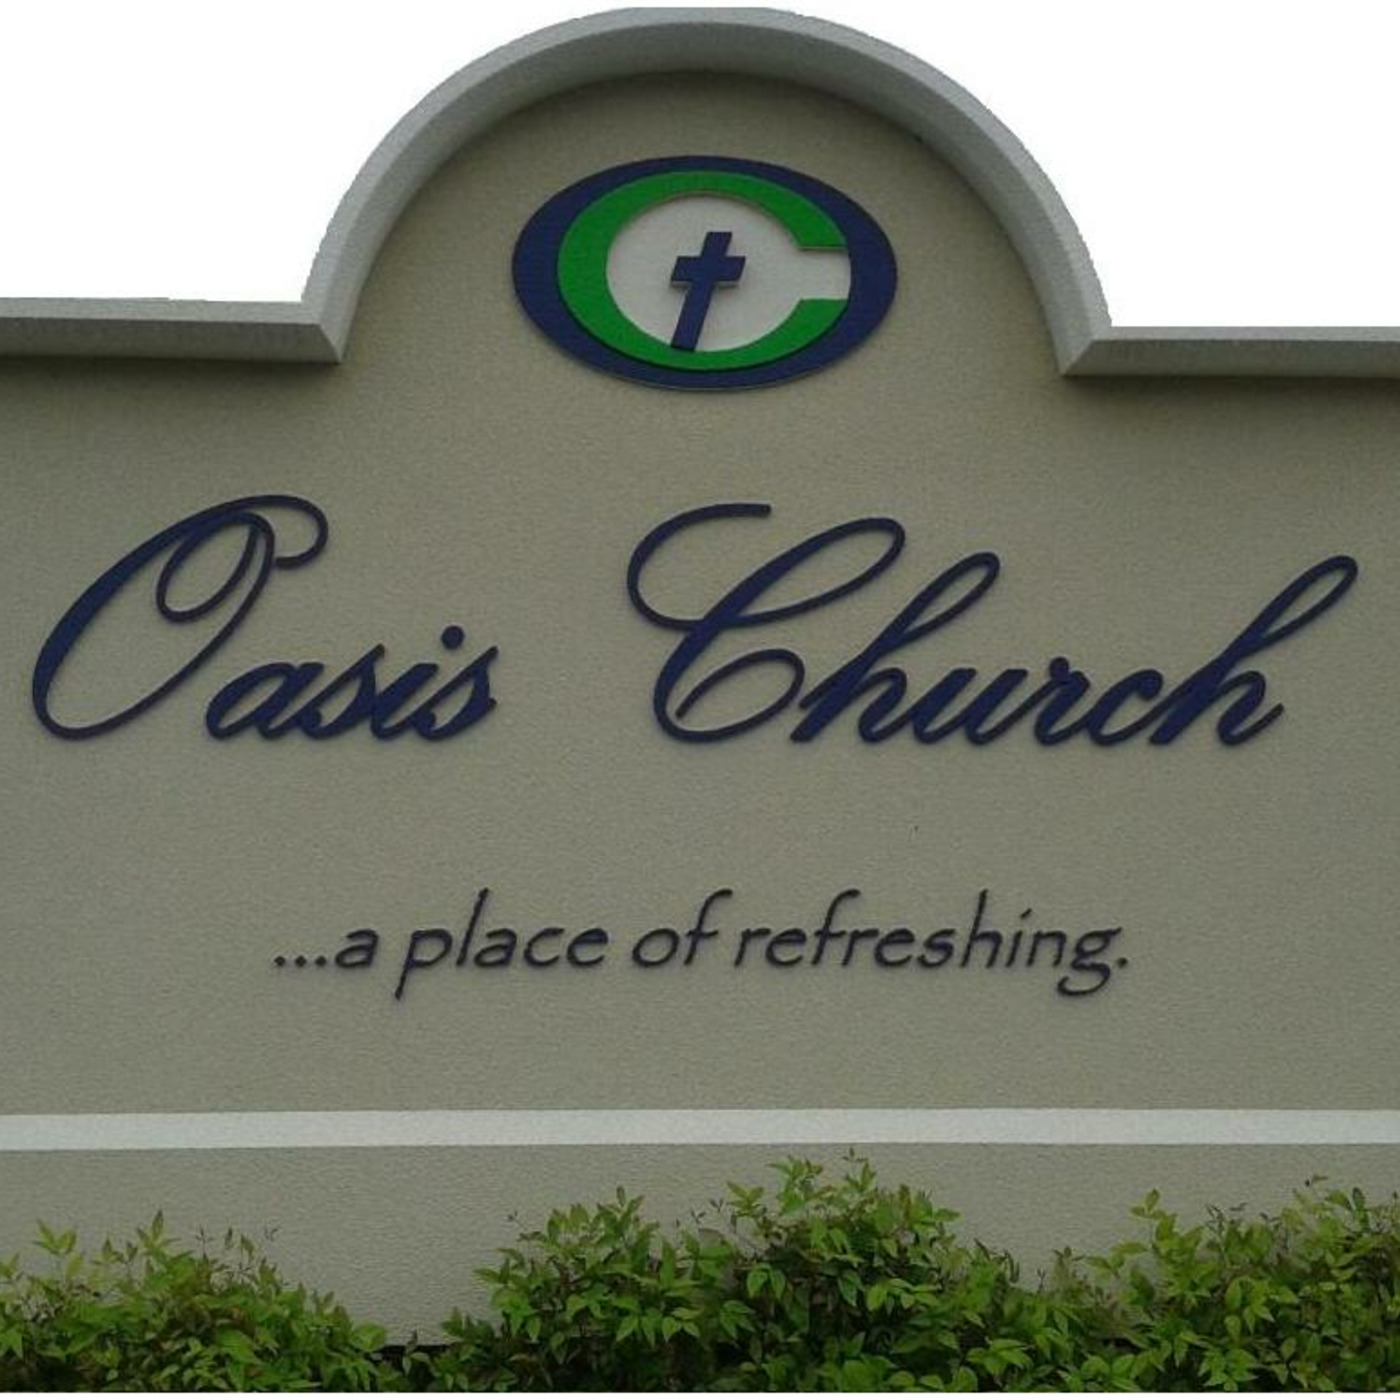 OASIS CHURCH OF CITRONELLE